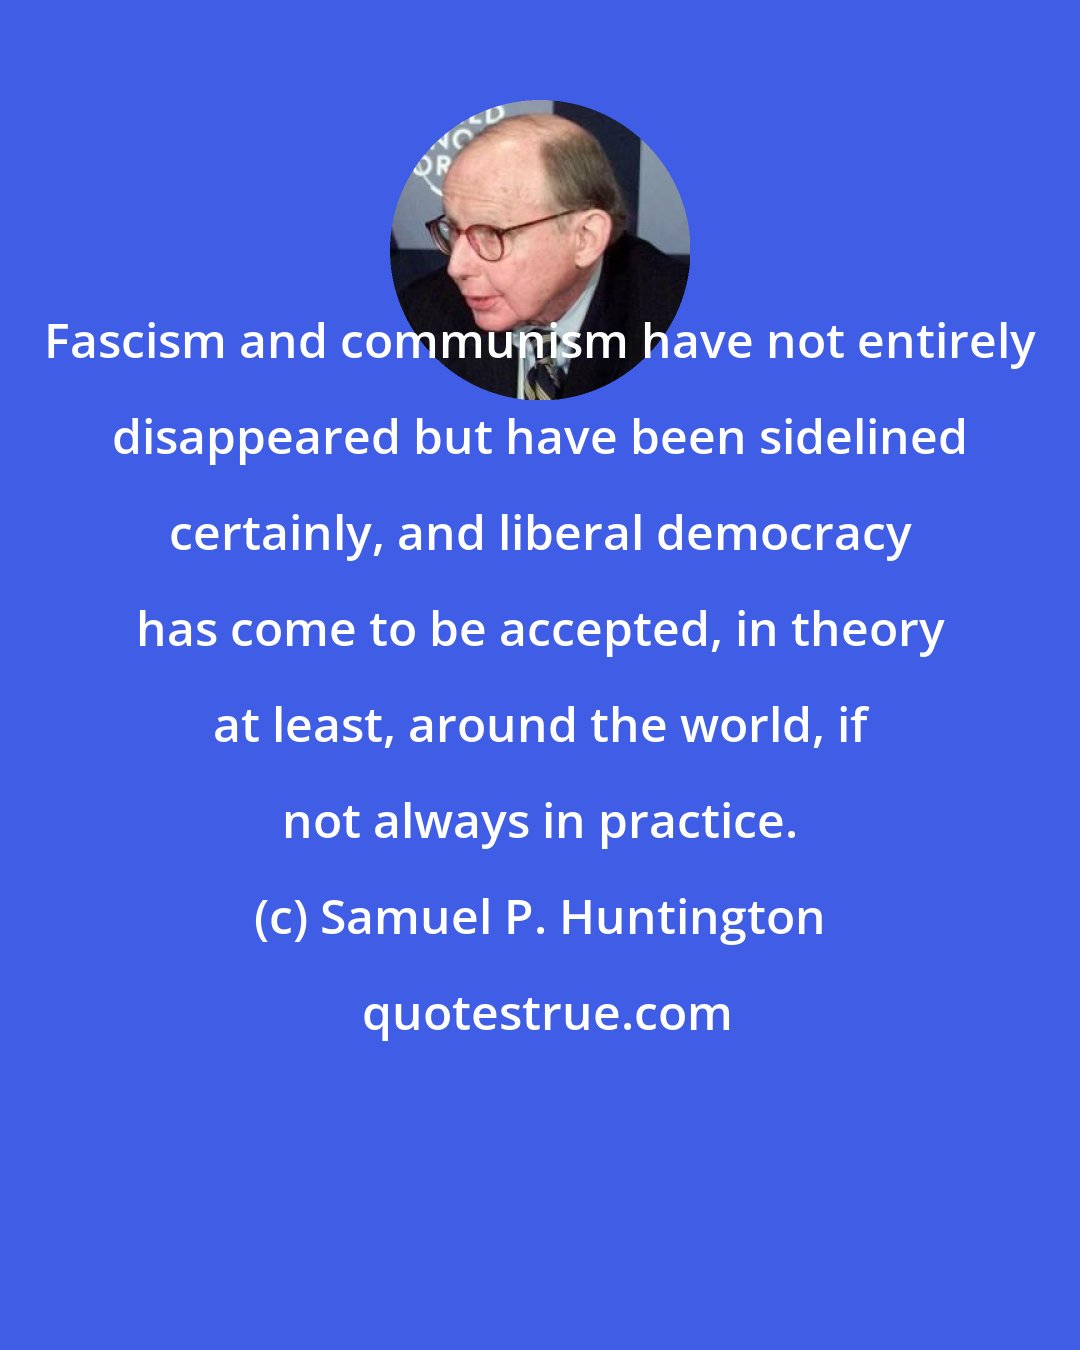 Samuel P. Huntington: Fascism and communism have not entirely disappeared but have been sidelined certainly, and liberal democracy has come to be accepted, in theory at least, around the world, if not always in practice.